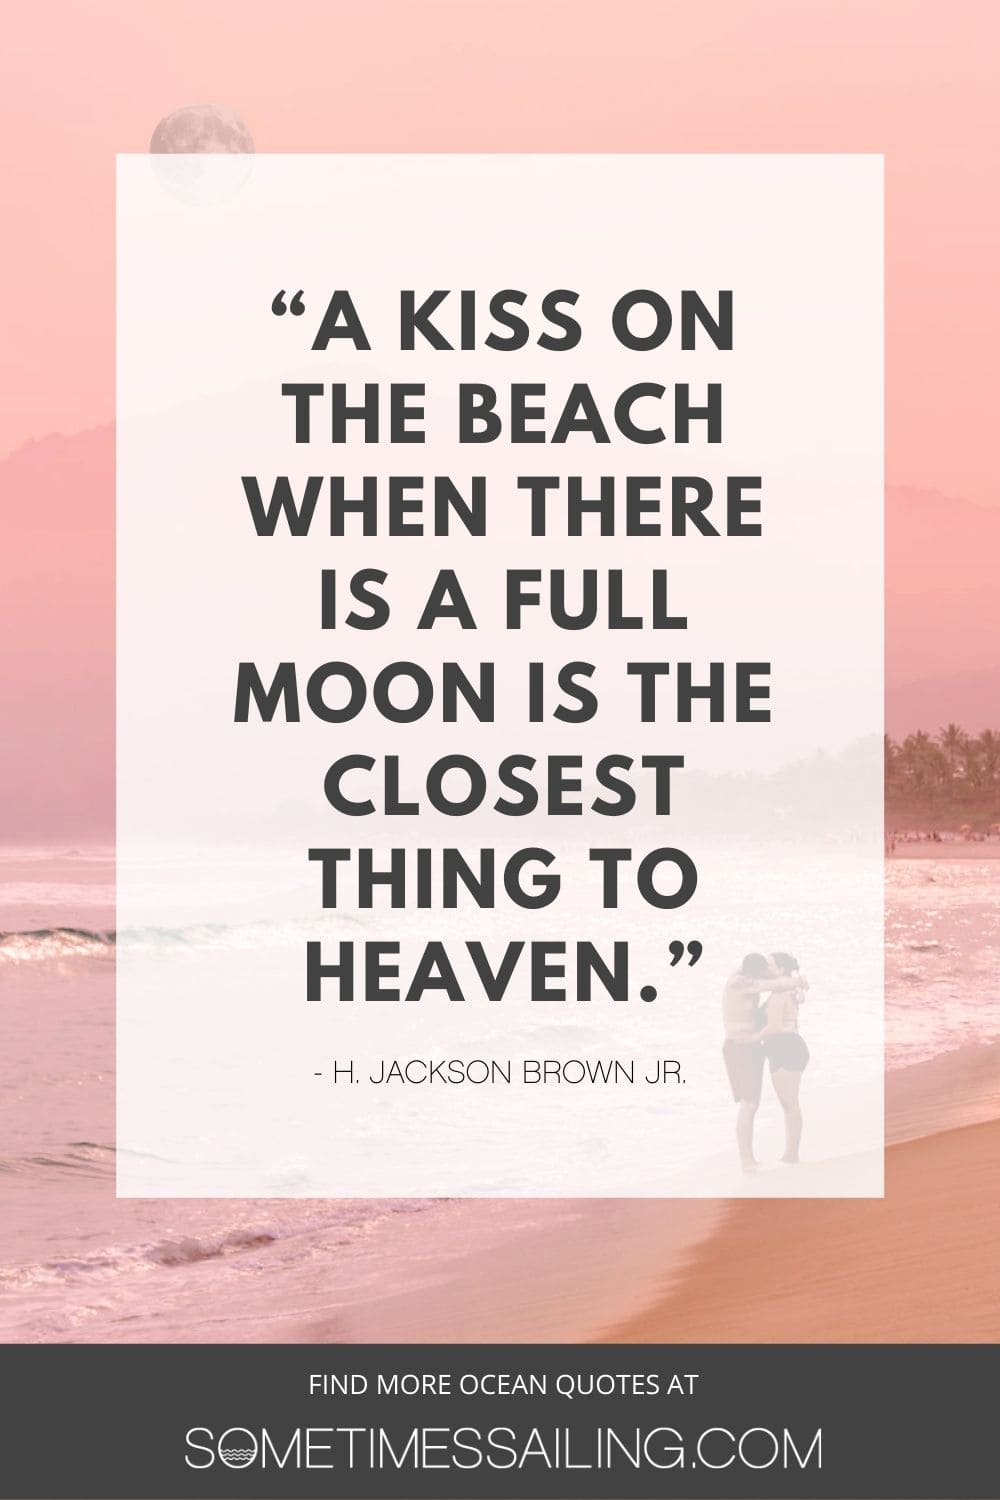 Inspirational ocean quote with a photo of the shore and ocean behind it during a pink sunset with a couple kissing.